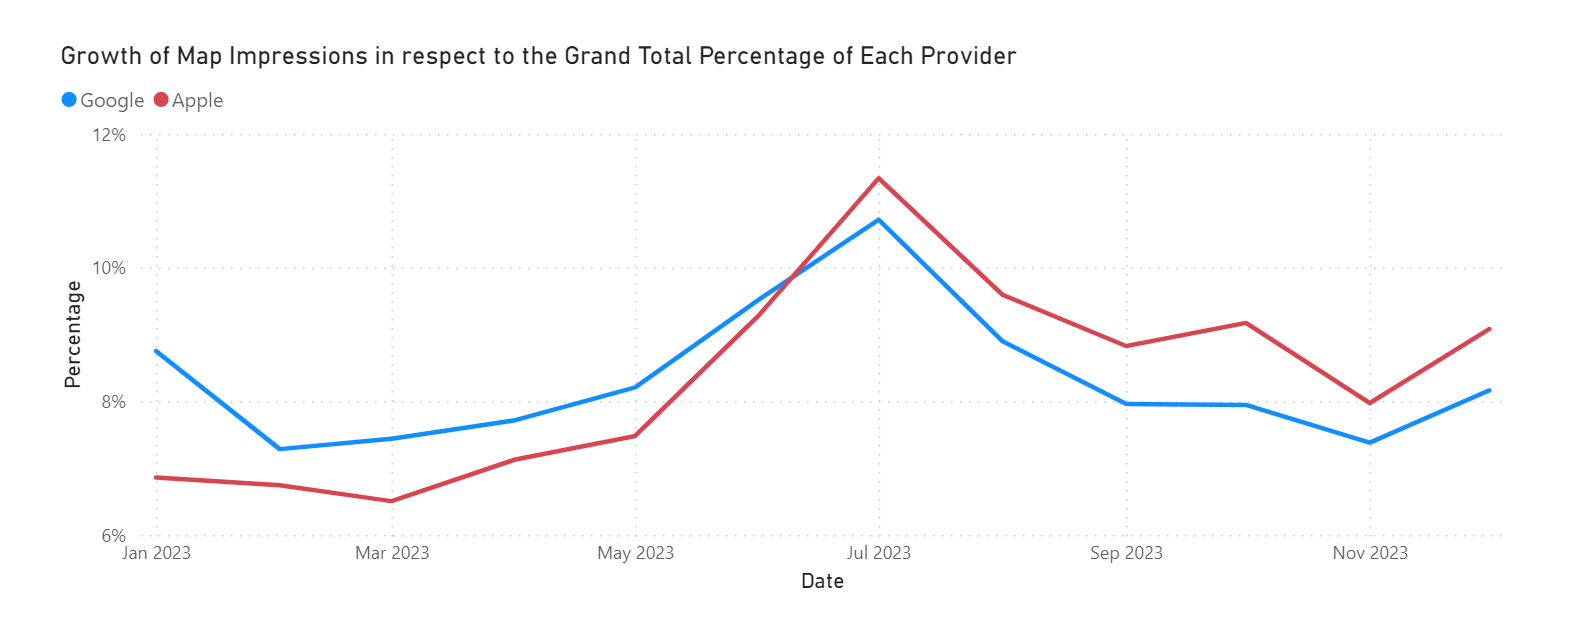 Growth of Map Impressions in respect to the Grand Total Percentage of Each Provider 2023